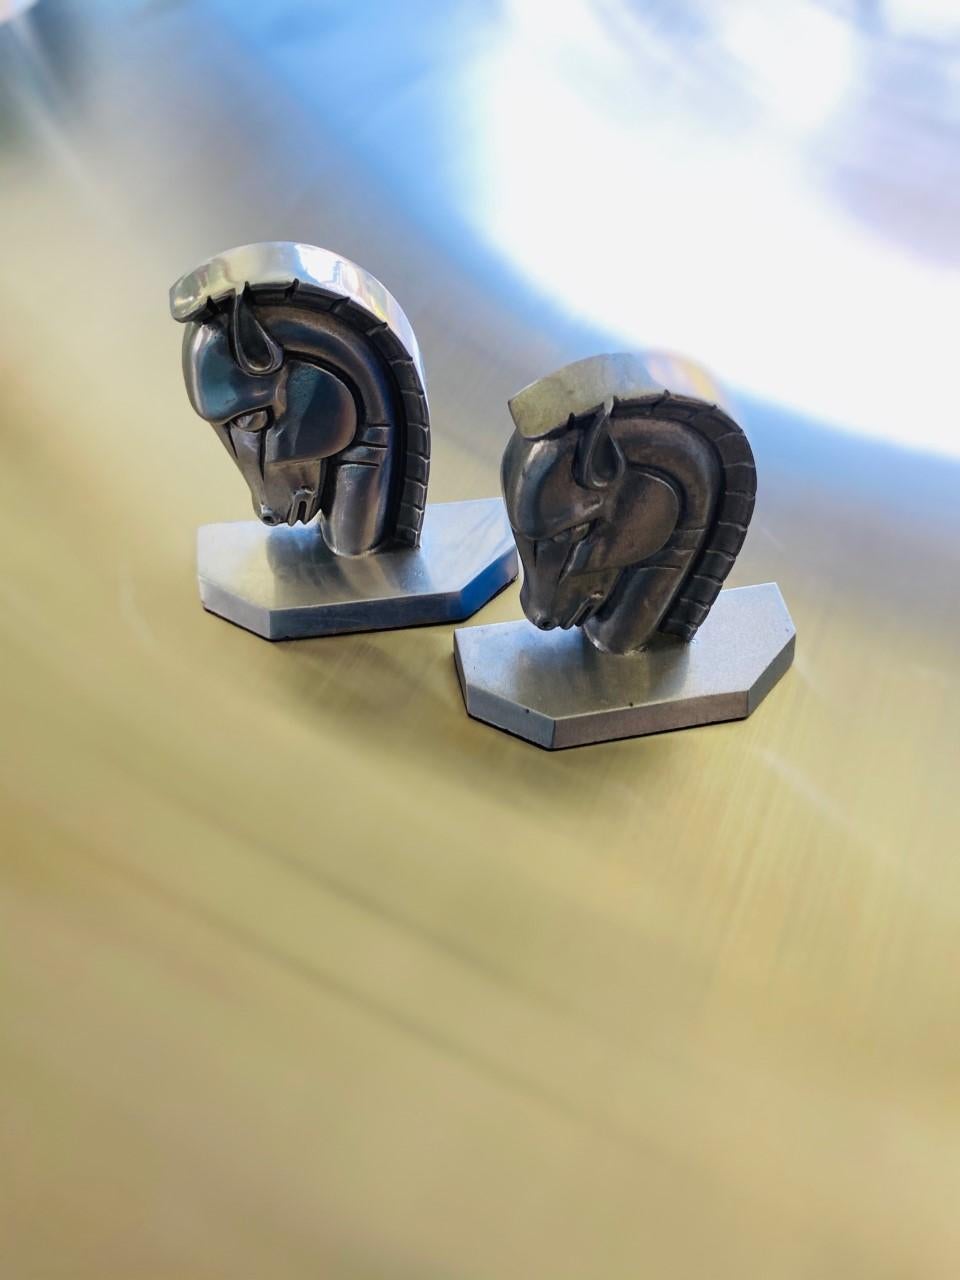 Beautifully classic Art Deco Trojan horse head bookends. This pair is in great vintage condition. Made of steel, these pieces reflect the precise and boldly delineated design characteristic of the Art Deco era. The horse heads are depicted in a